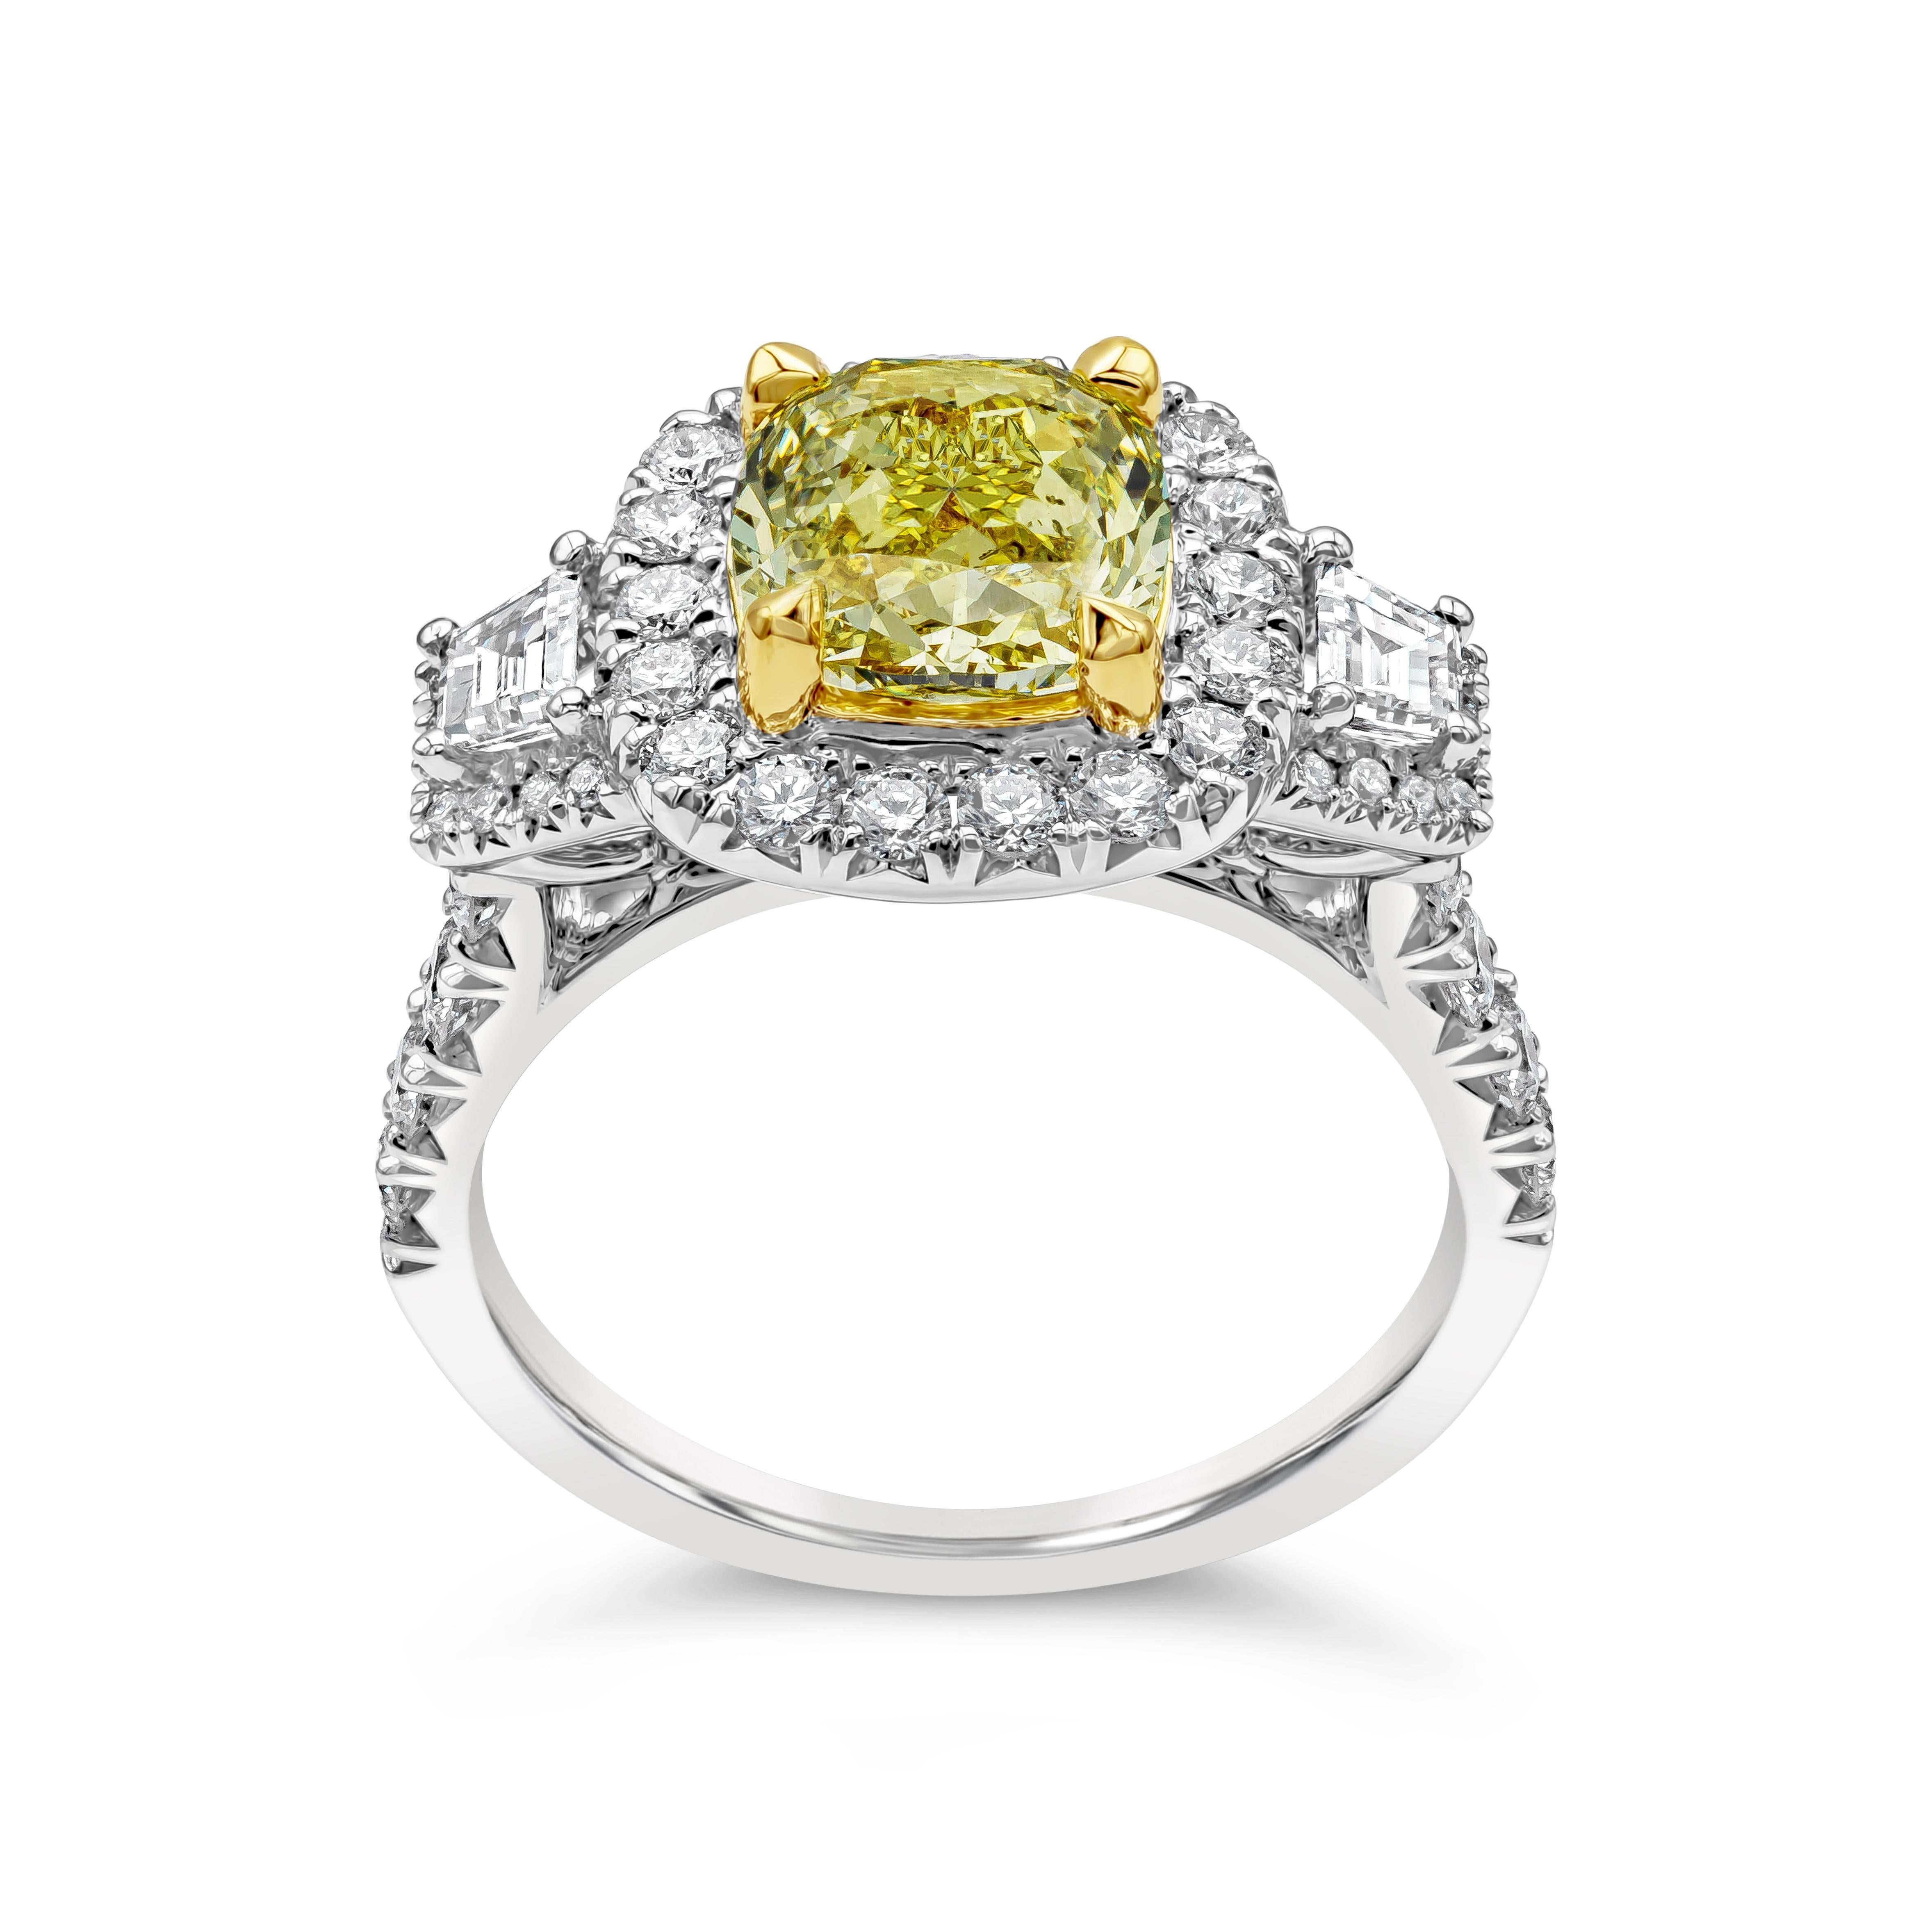 Contemporary GIA Certified 2.26 Carats Cushion Cut Fancy Yellow Diamond Halo Engagement Ring For Sale